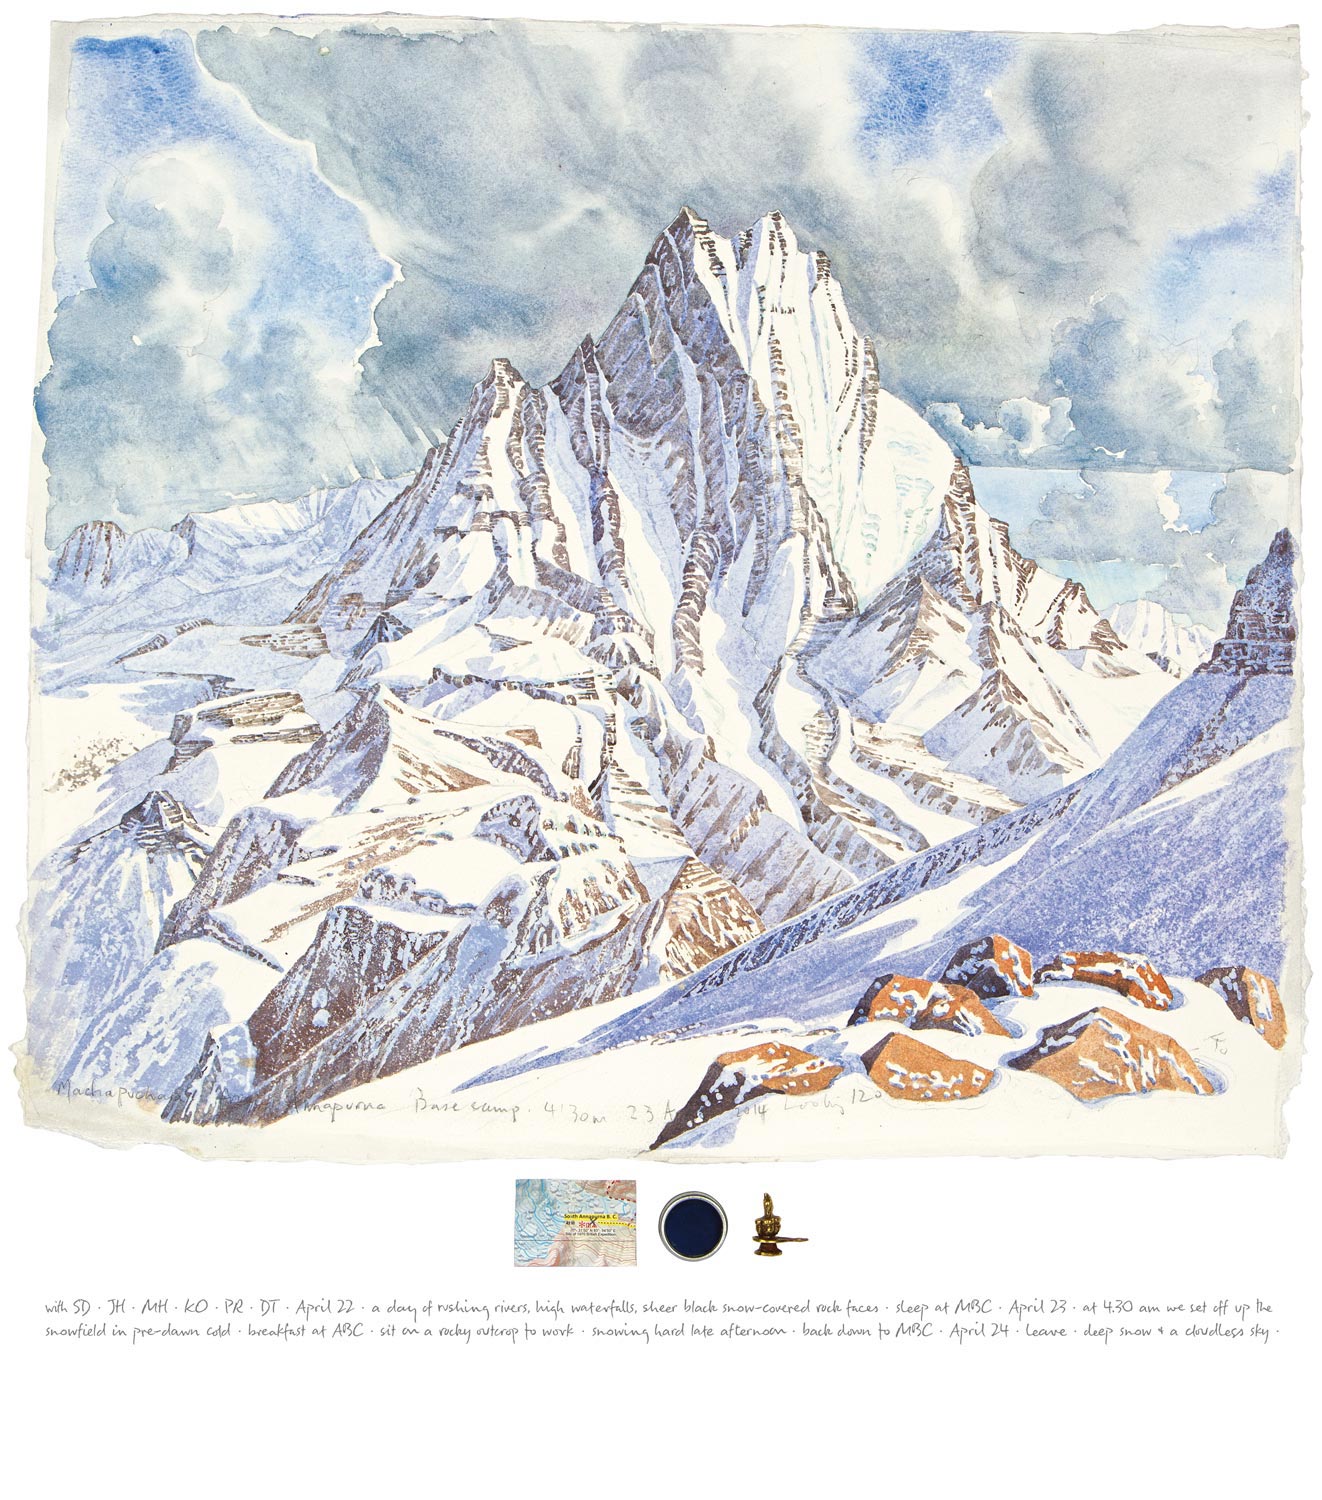   Tony Foster ,  Machapuchare 3—Looking S.S.E. from Annapurna Basecamp , 2014 